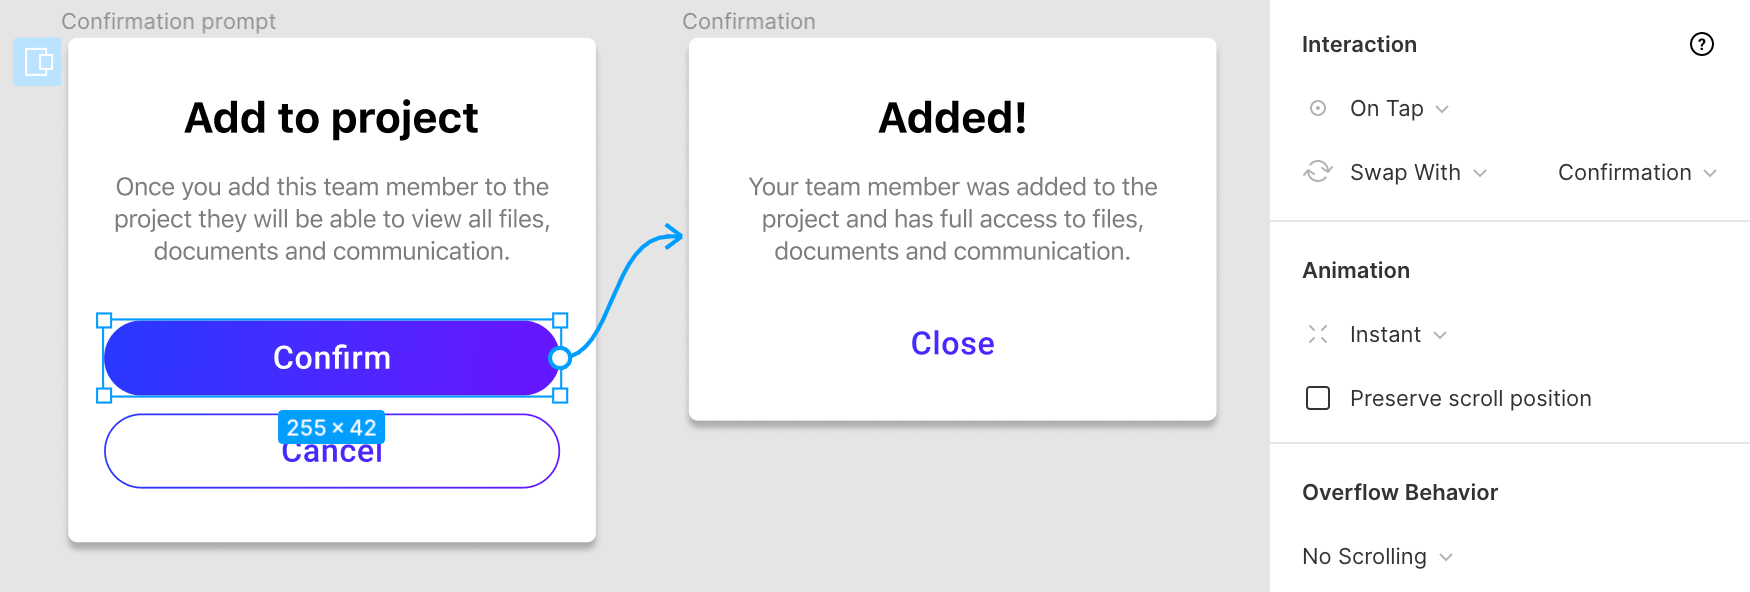 On tap animation for closing the modal